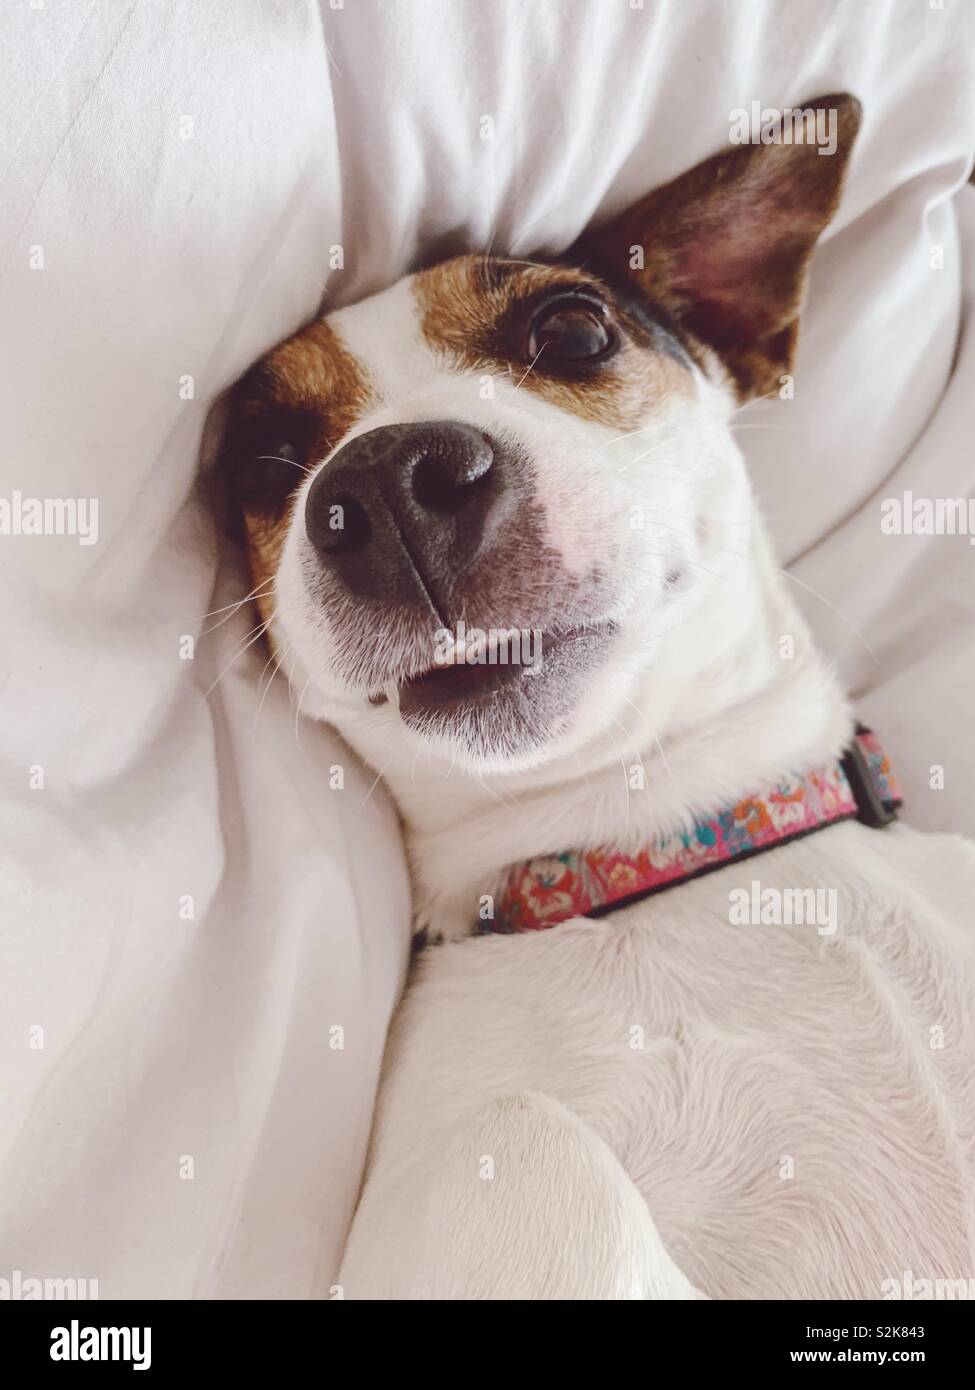 Portrait of dog lying on comfortable pillow making a cute face. Stock Photo